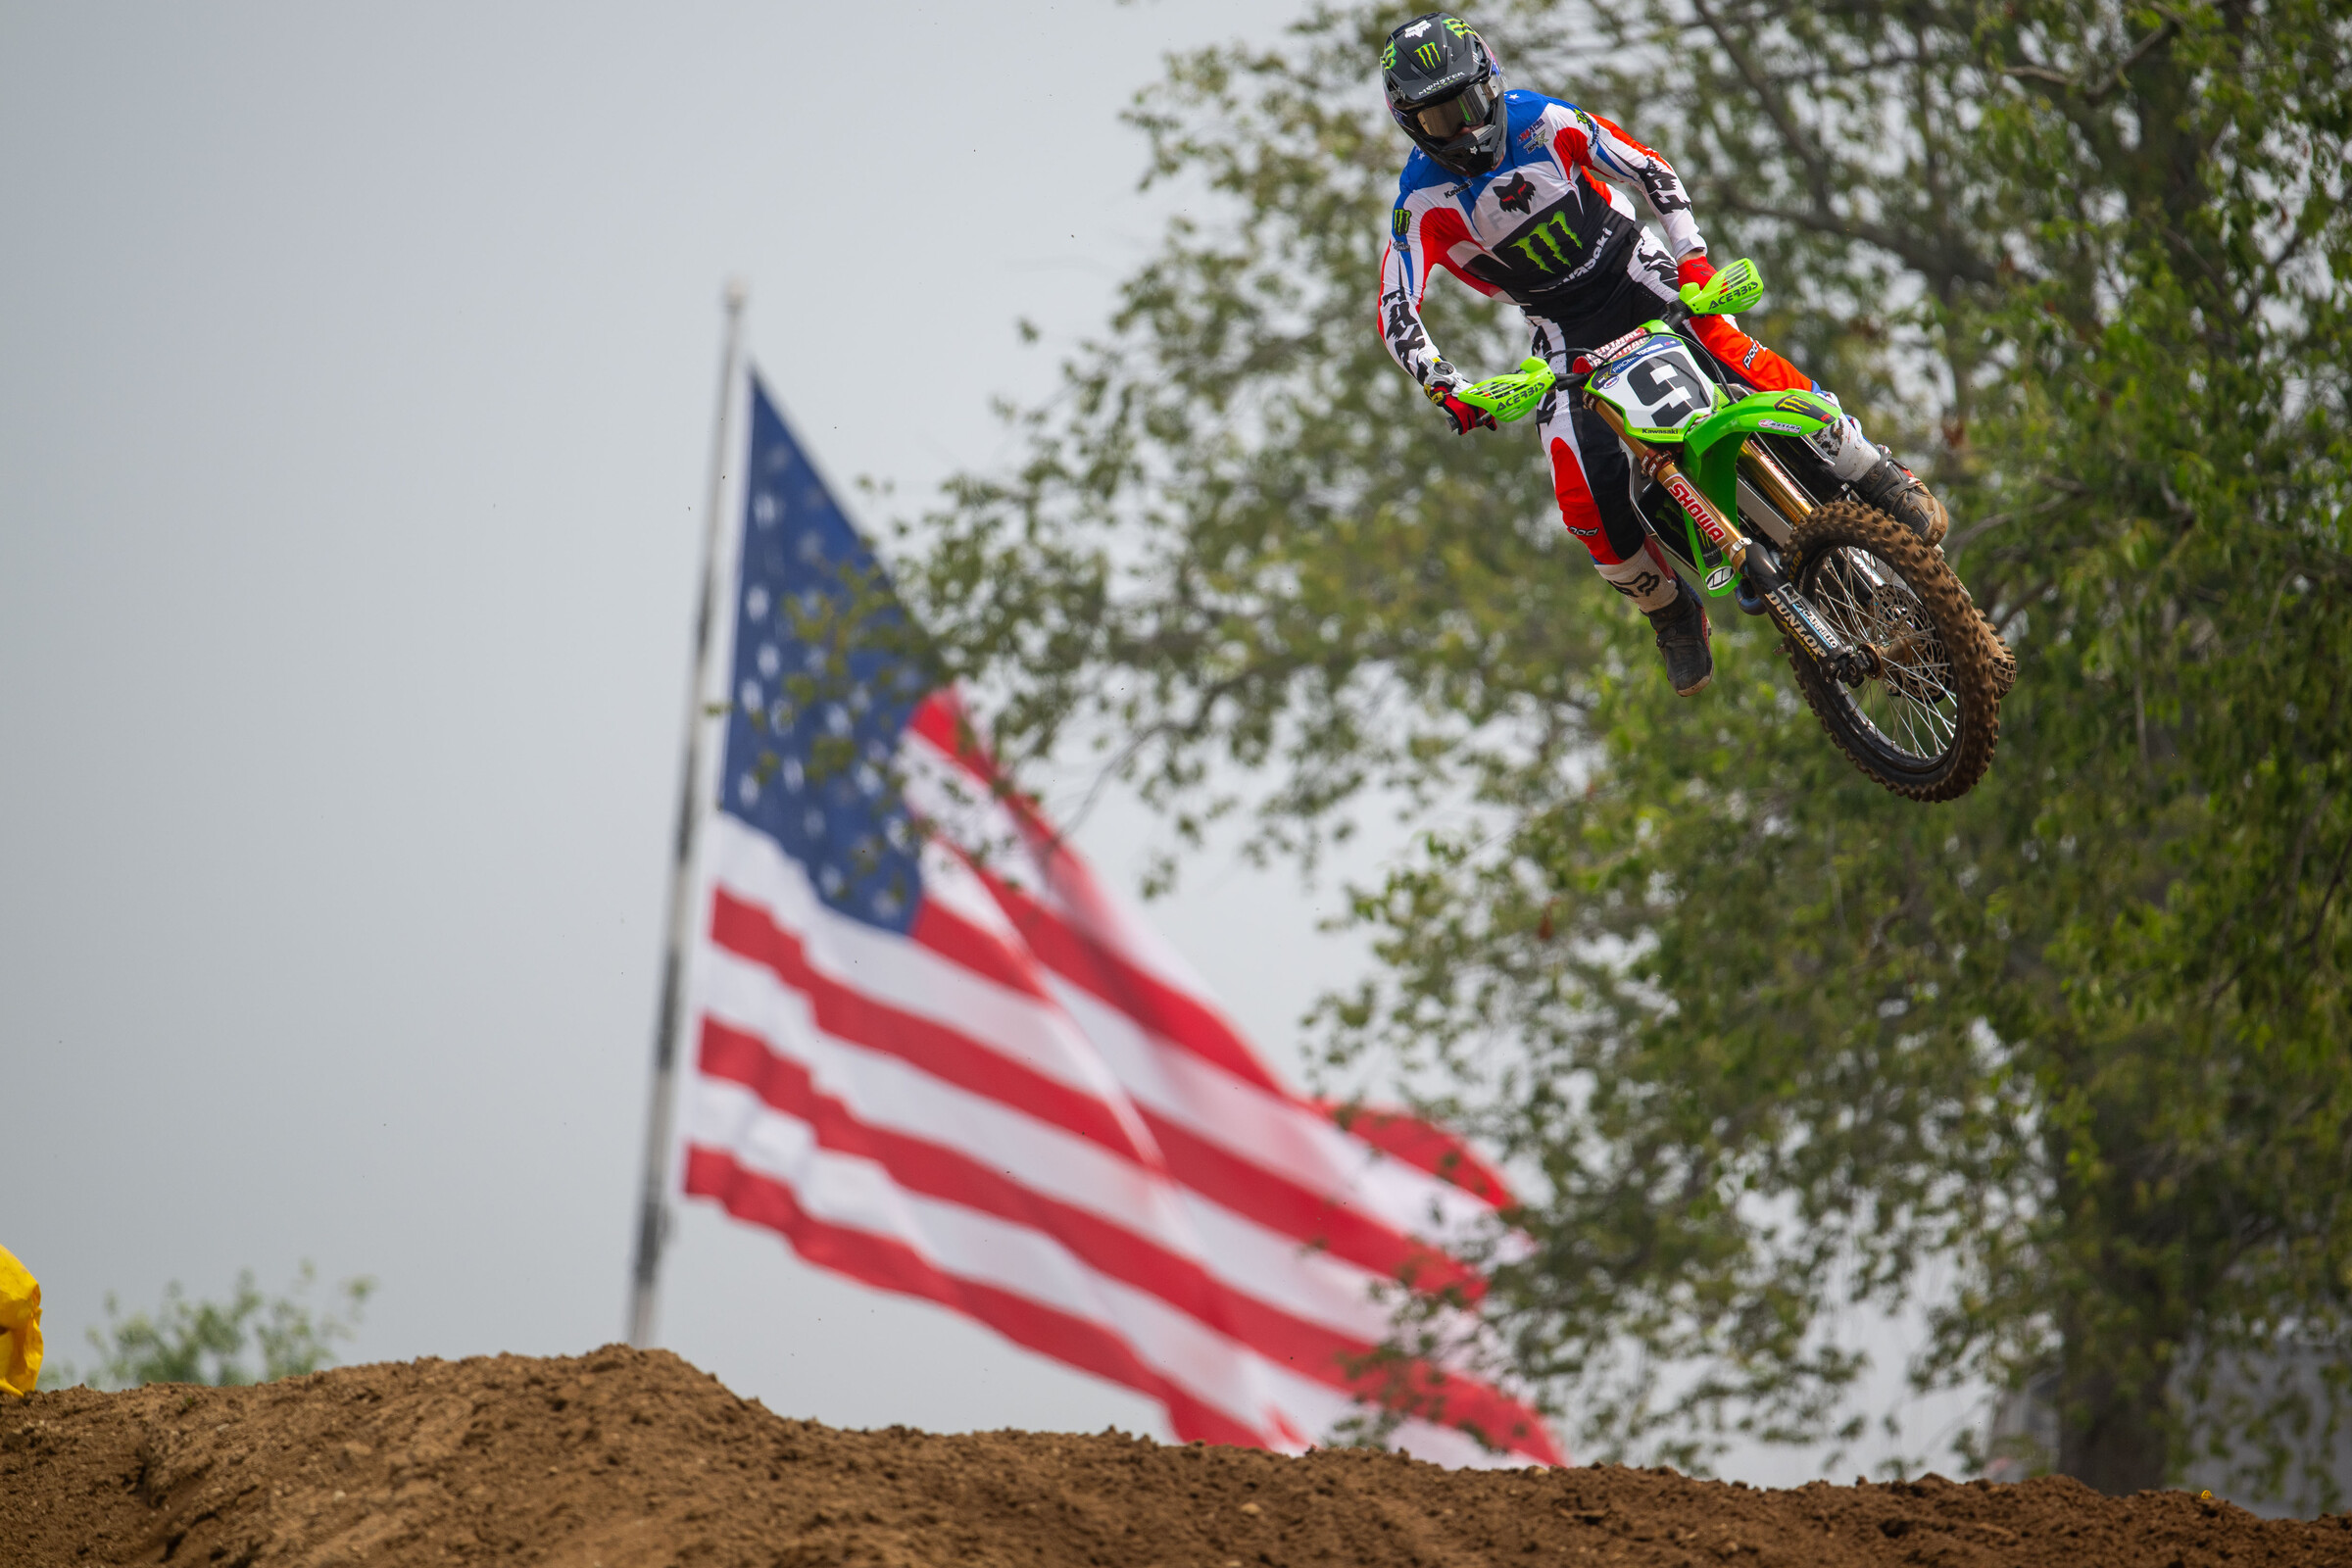 Full Day Coverage of the 2023 RedBud National